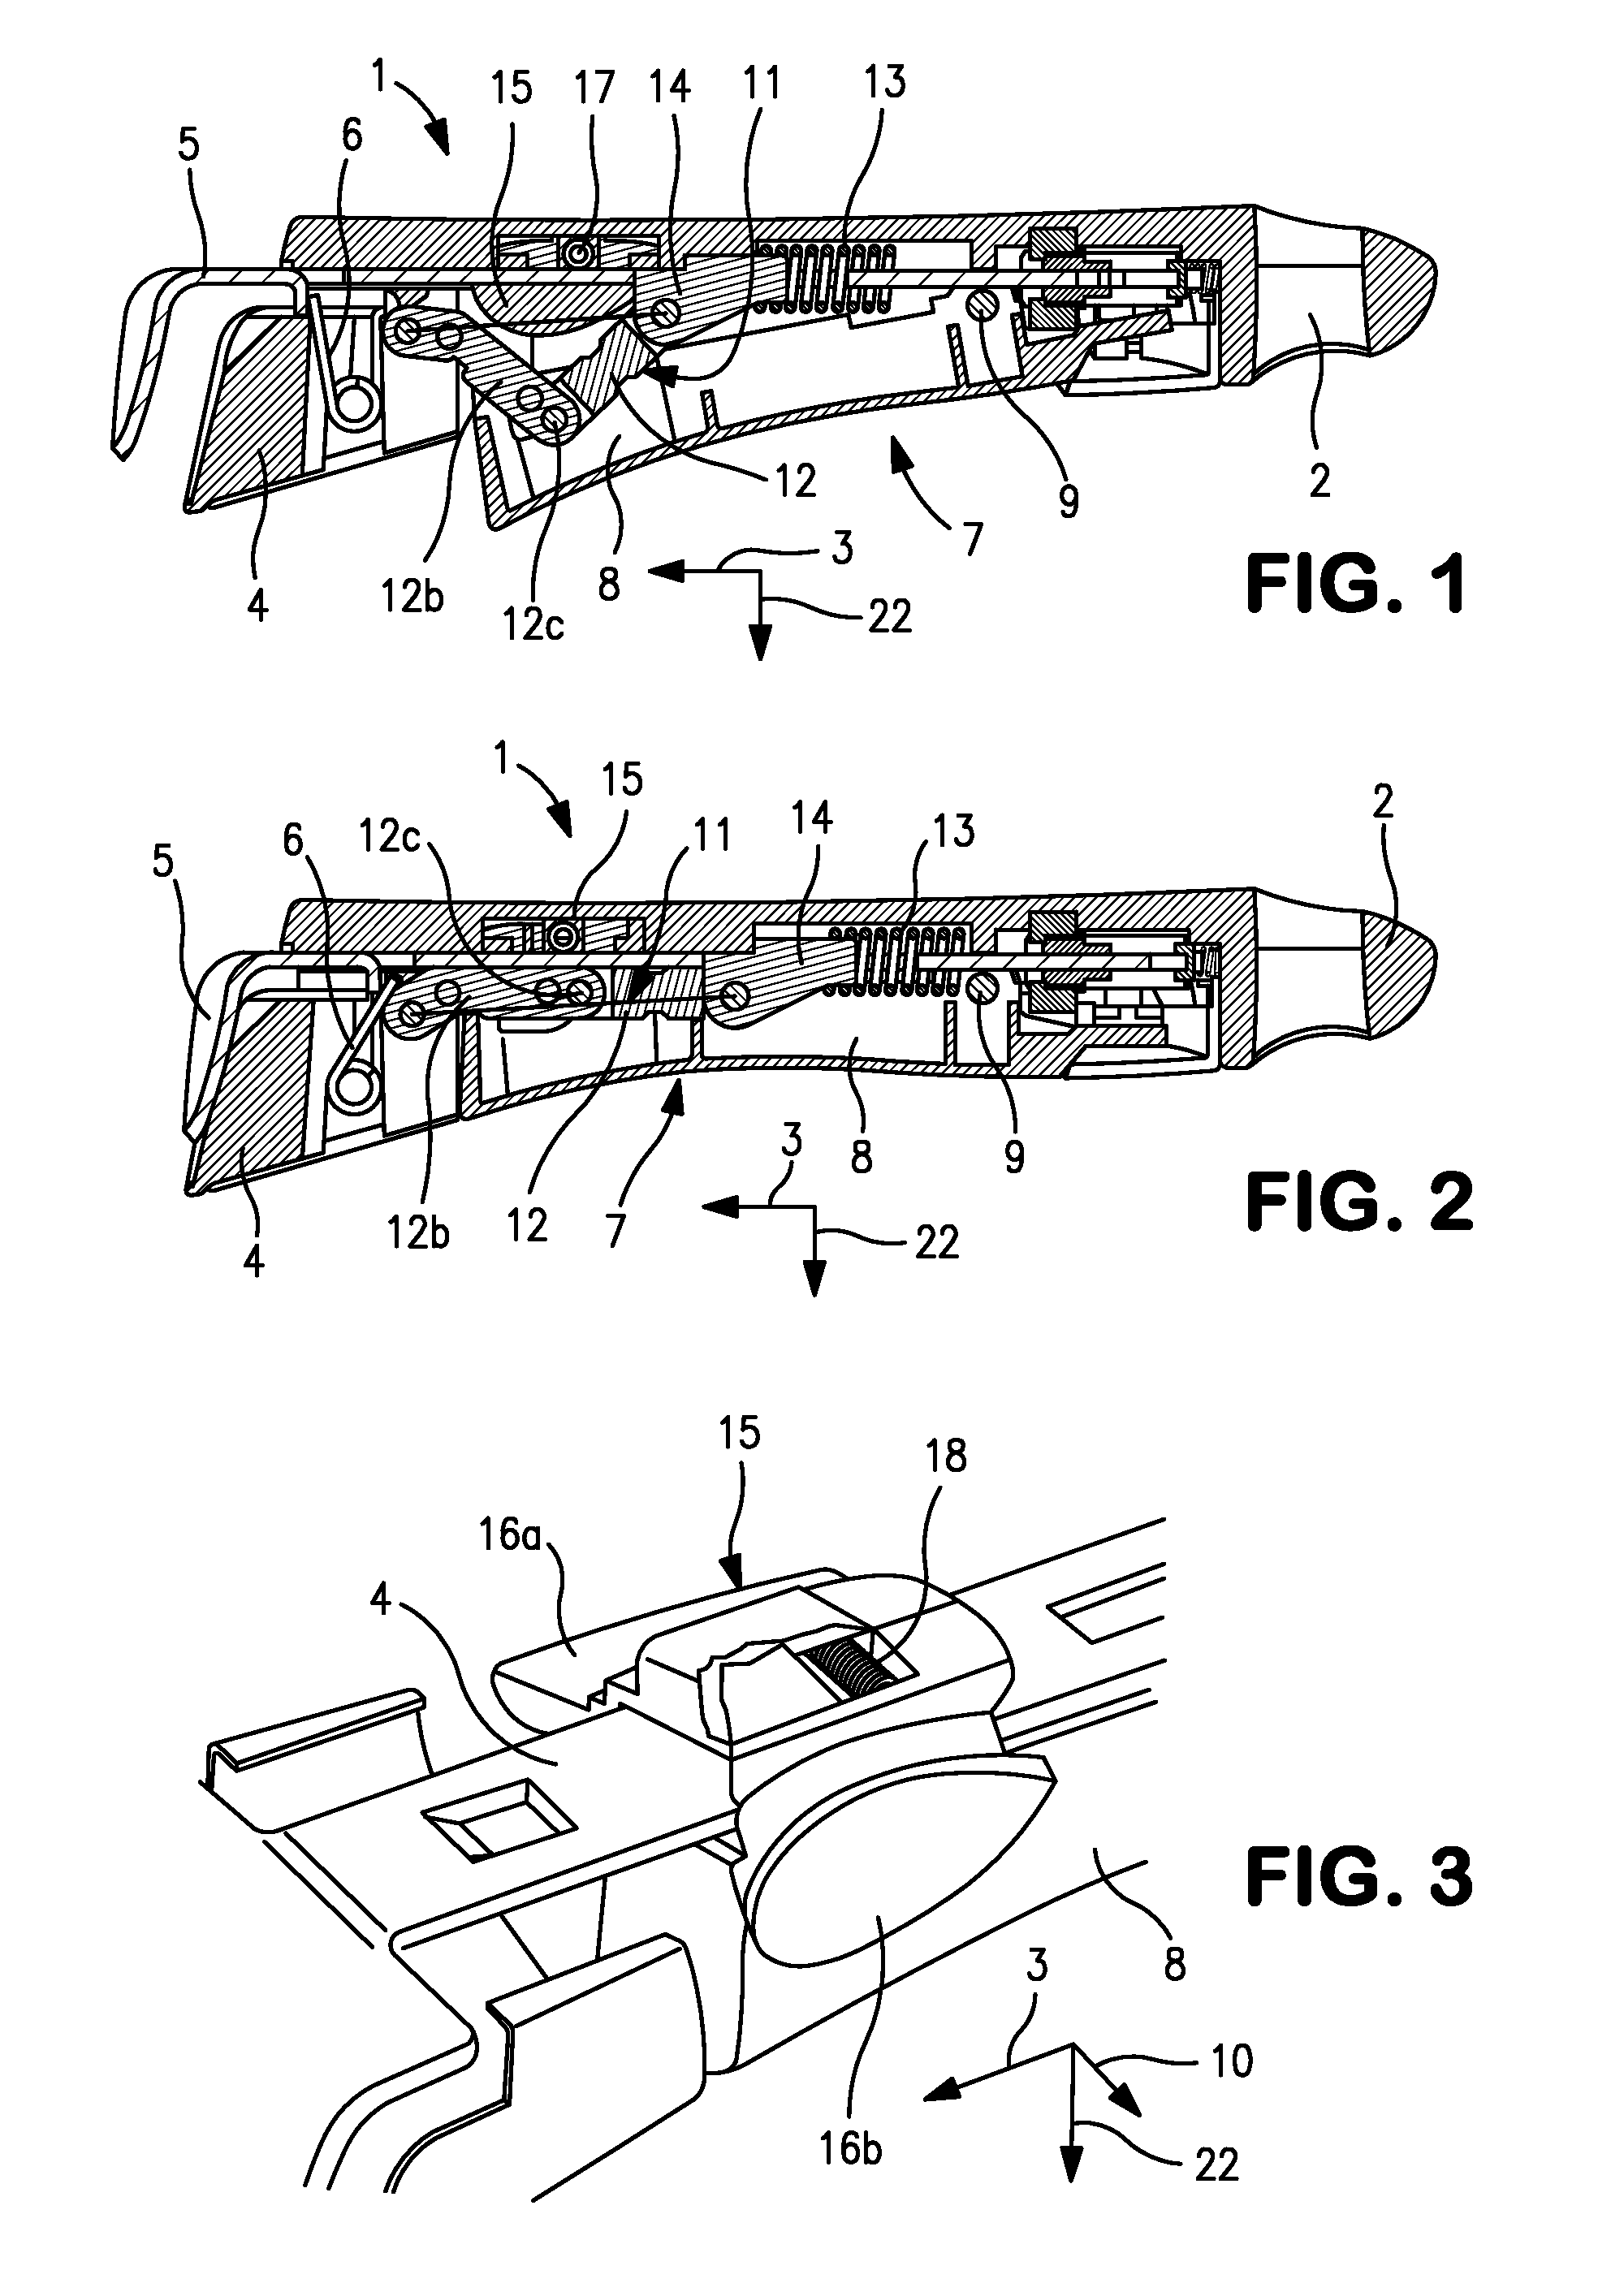 Detachable grip device having activation buttons for opening jaw-forming elements